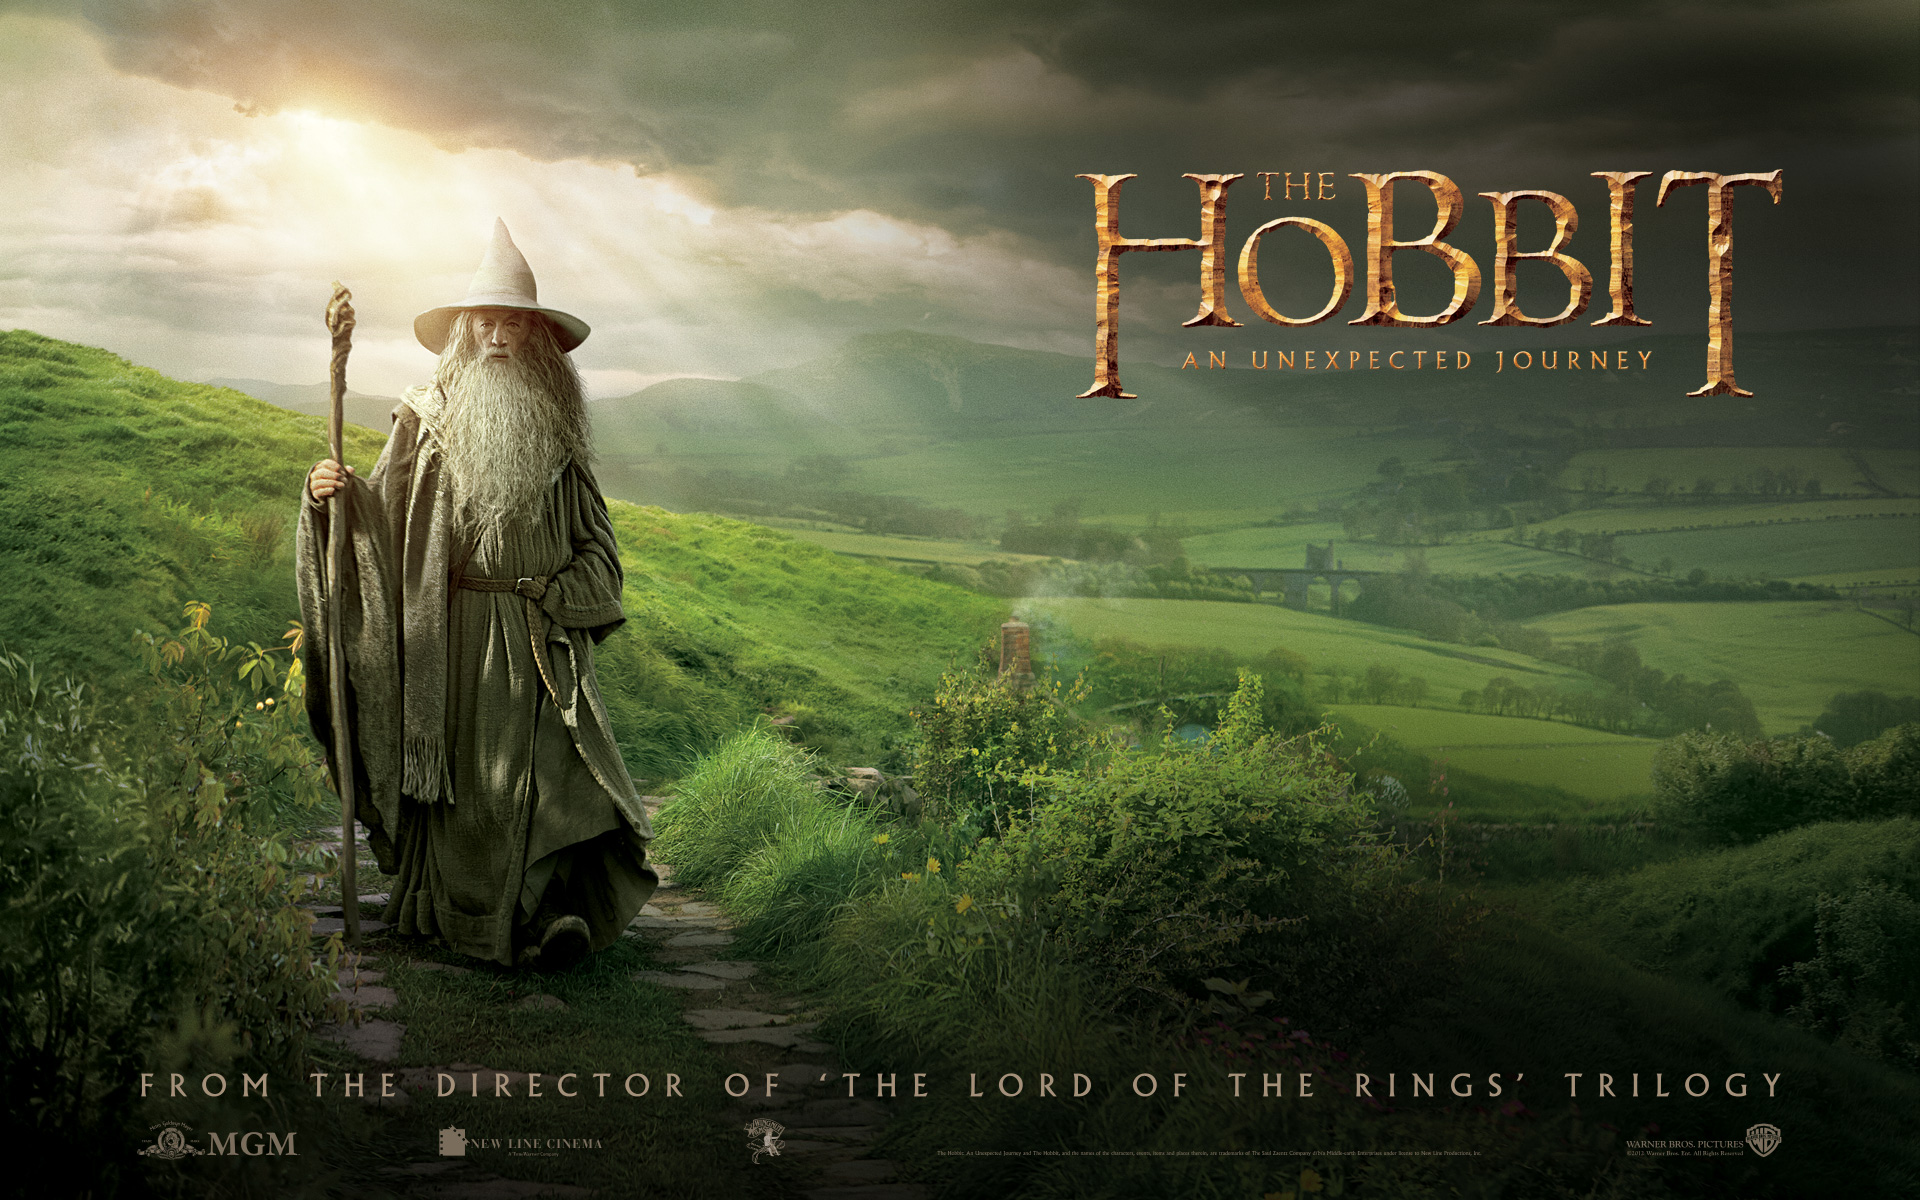 Download full size The Hobbit An Unexpected Journey wallpaper / Movies / 1920x1200